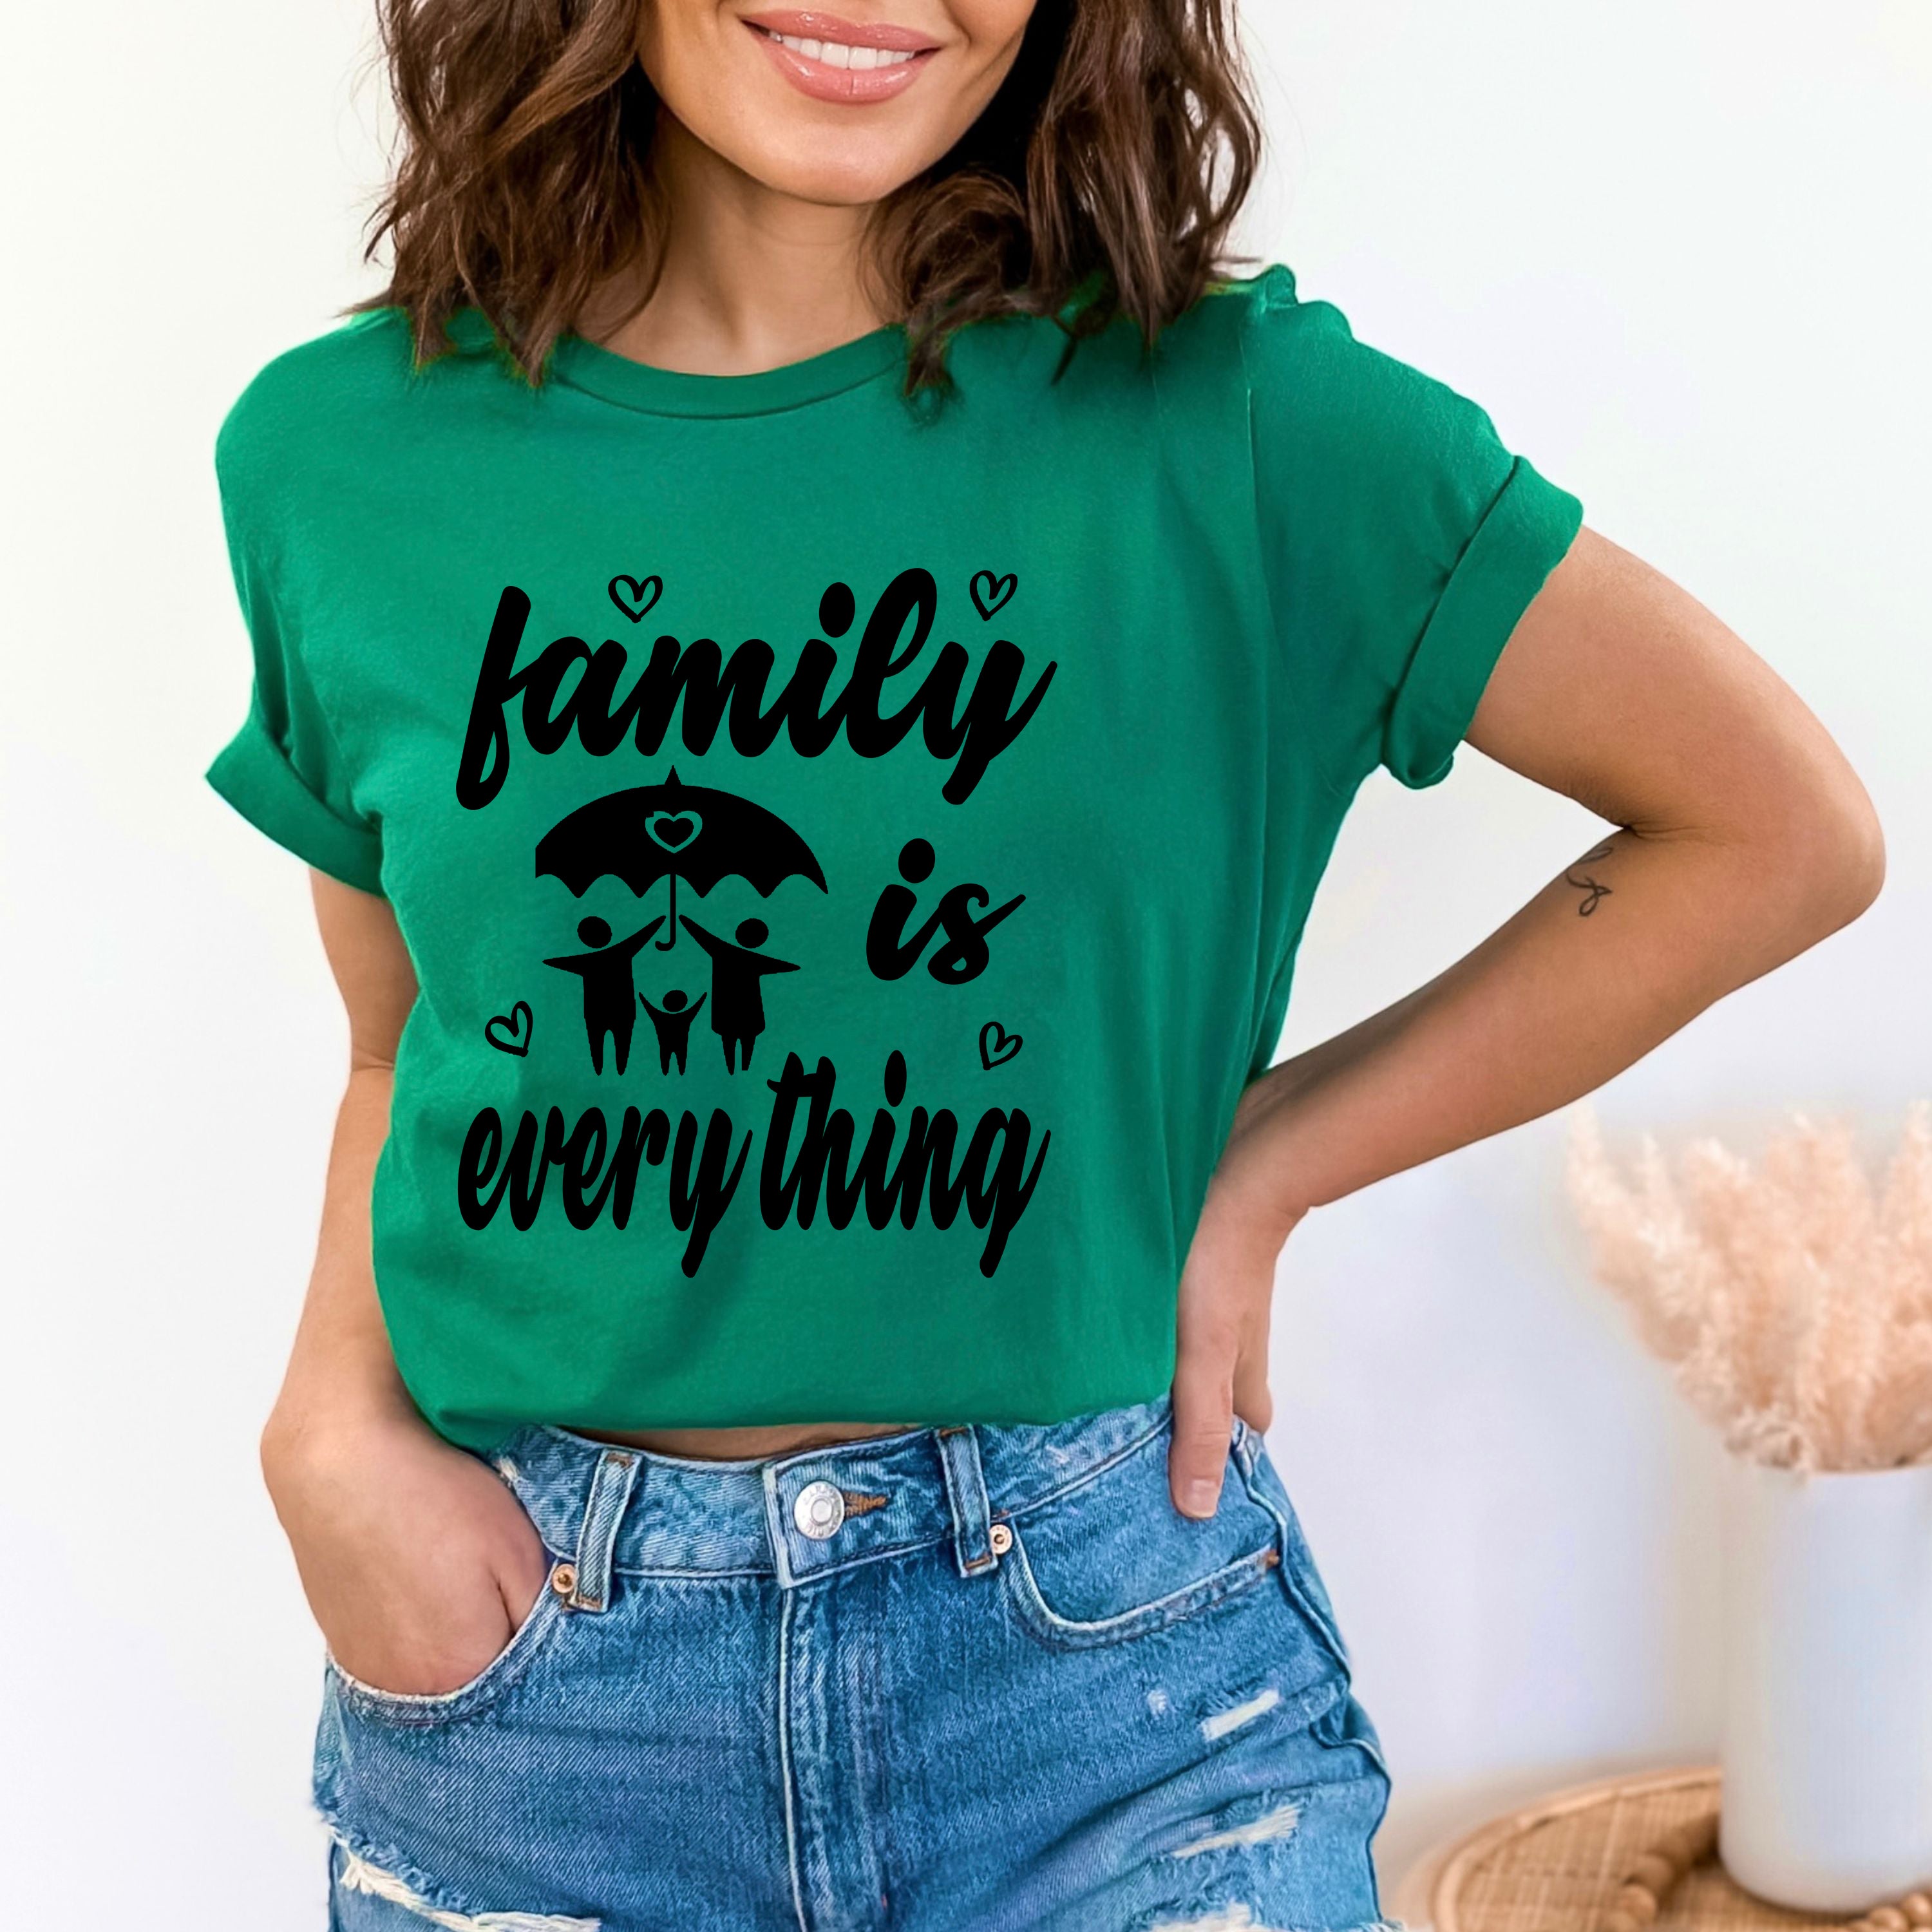 "Family is everything"